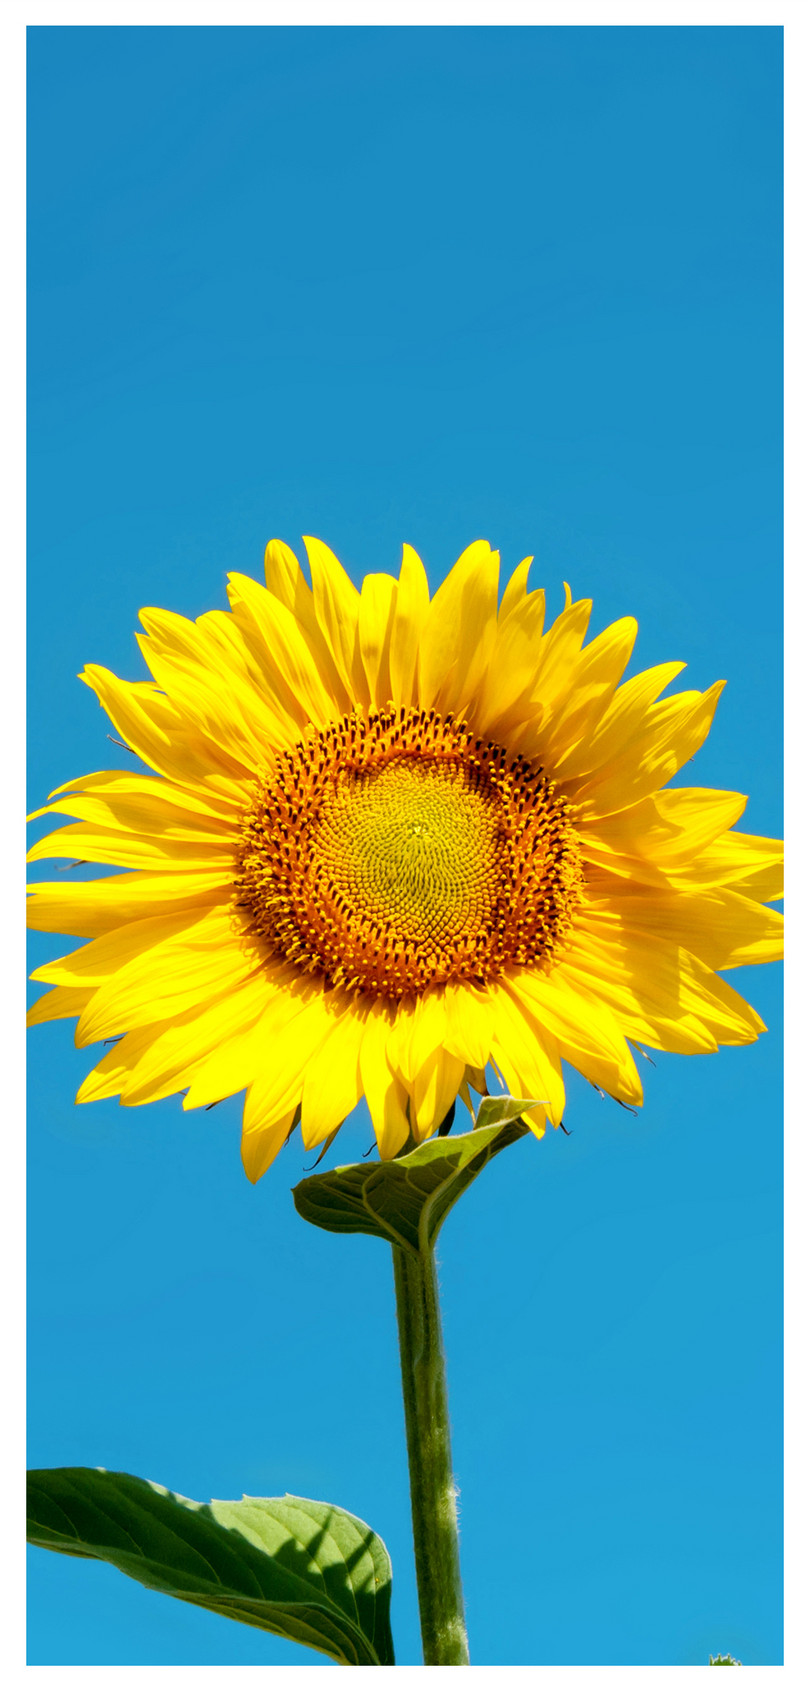 Sunflower Cell Phone Wallpaper Backgrounds Images Free Download 400293121 Lovepik Com